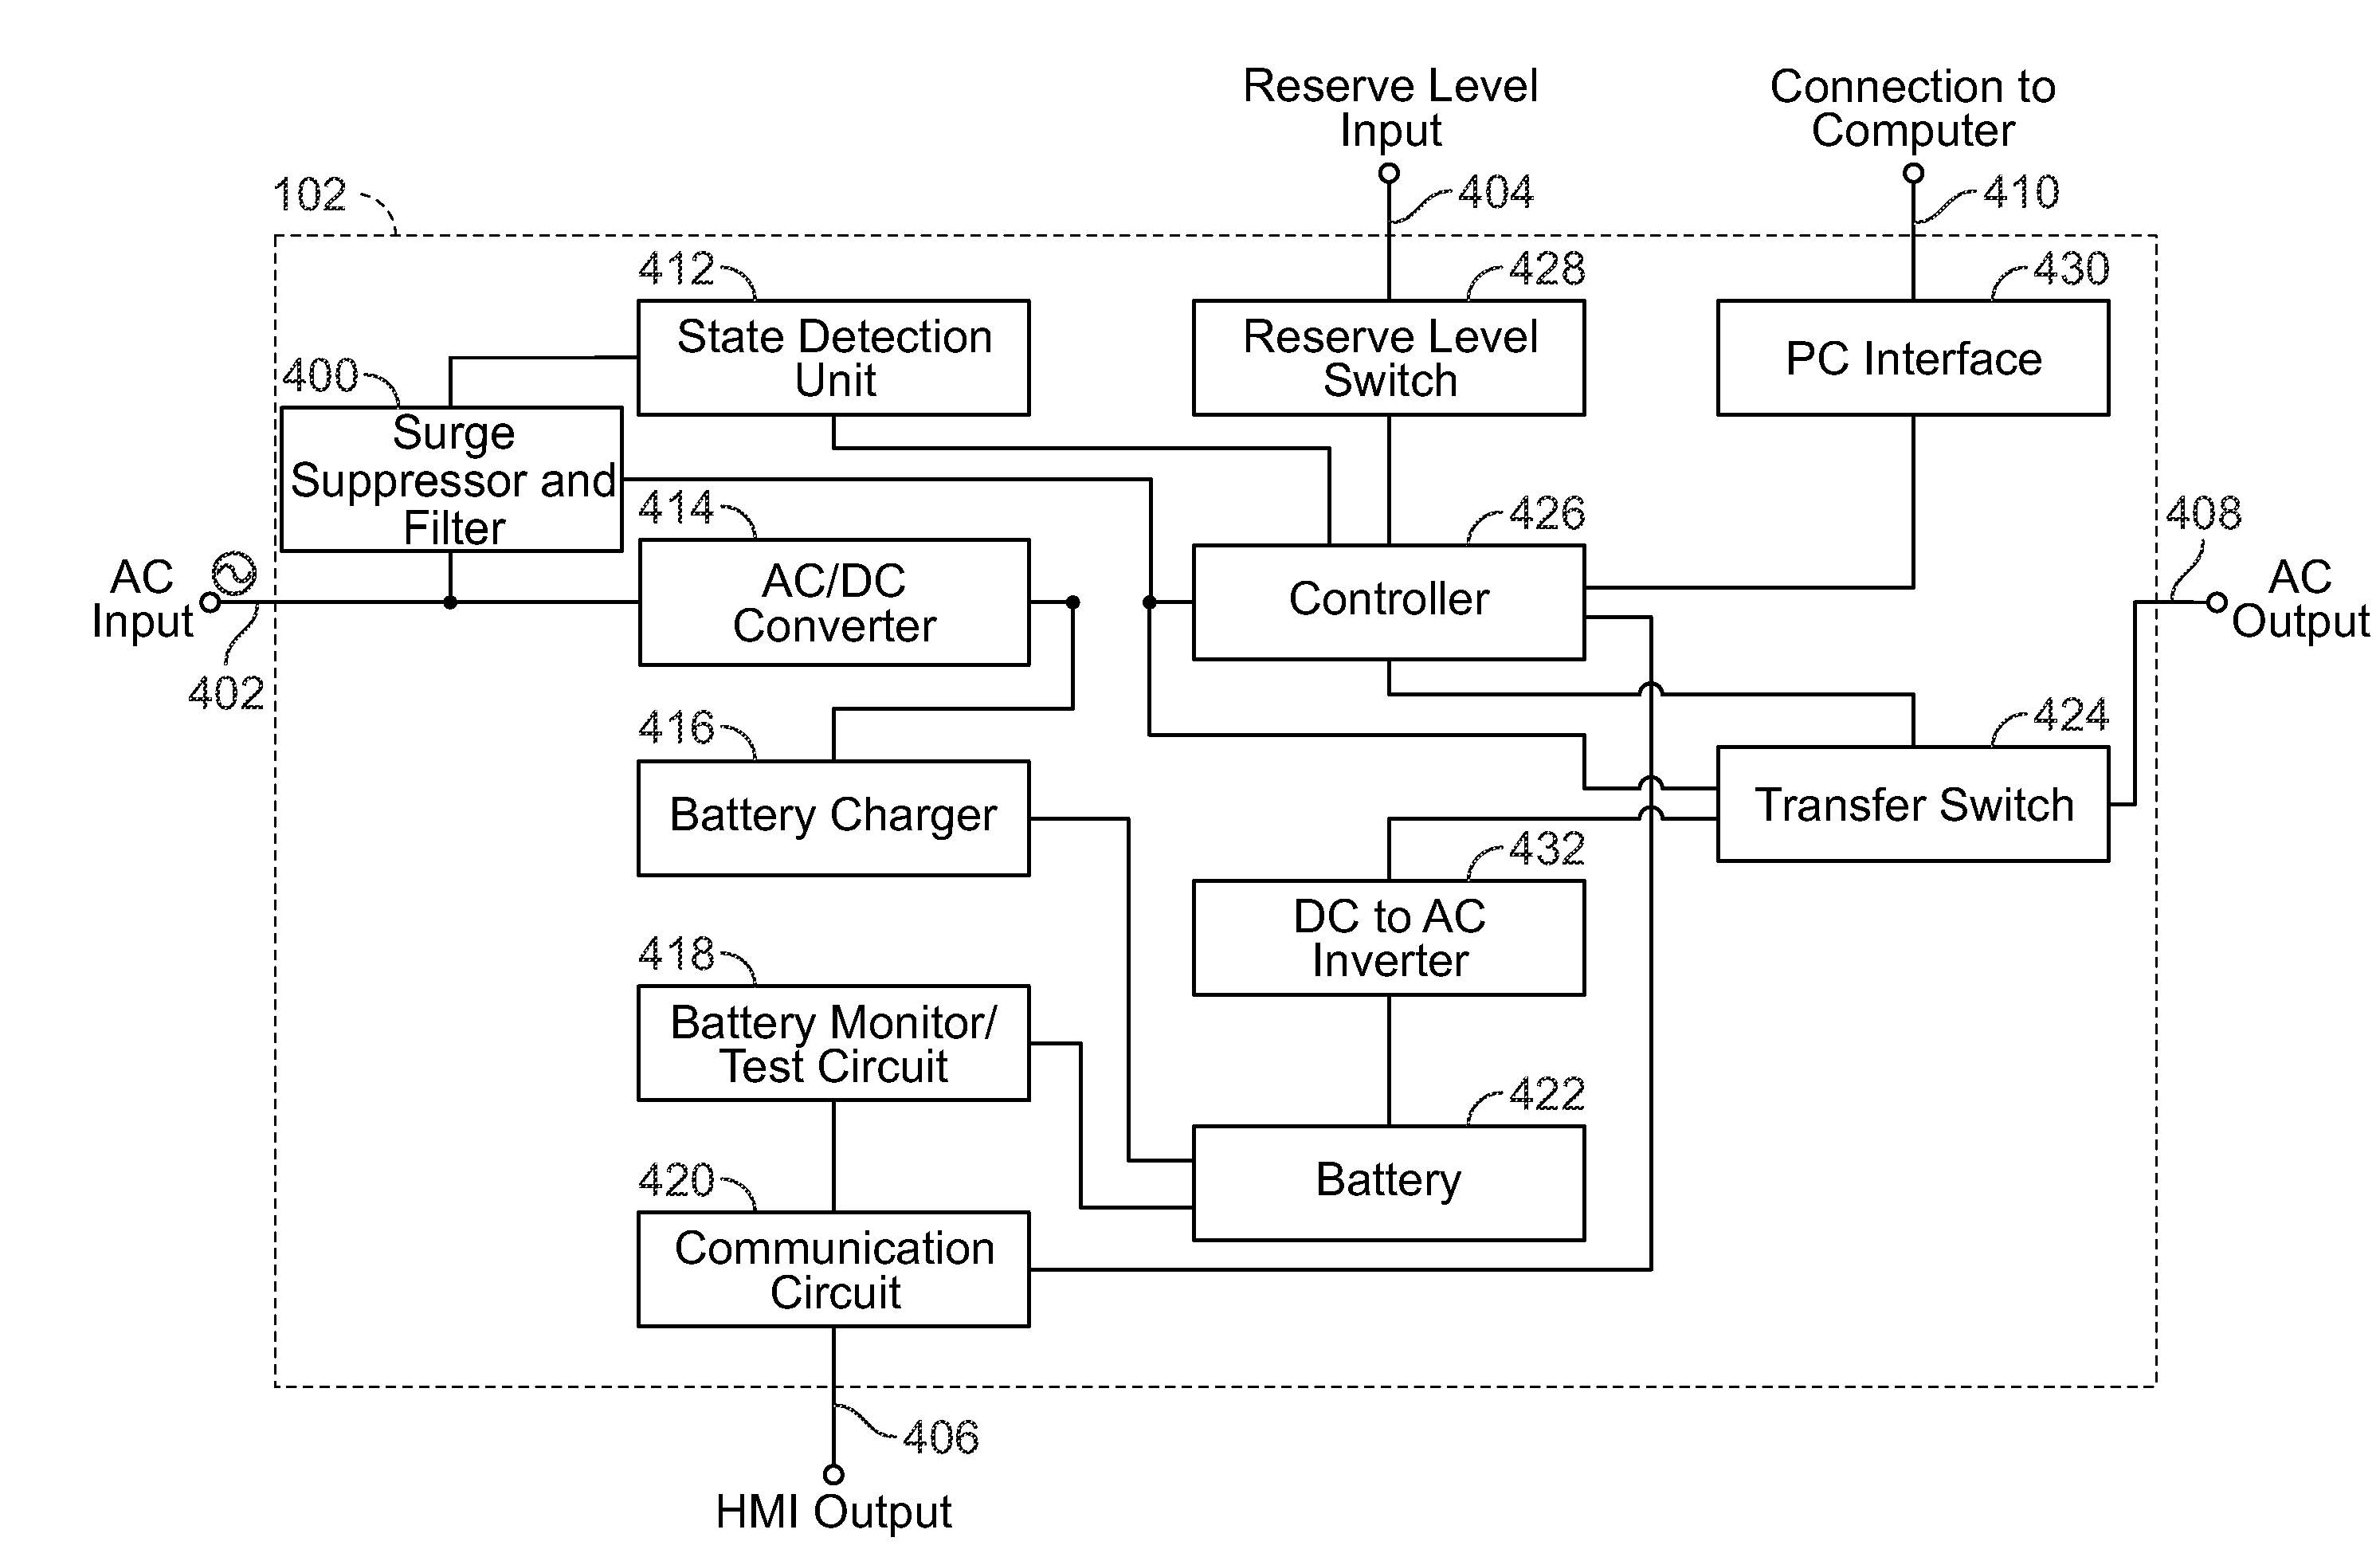 Estimated remaining life of a battery included in an uninterruptible power supply